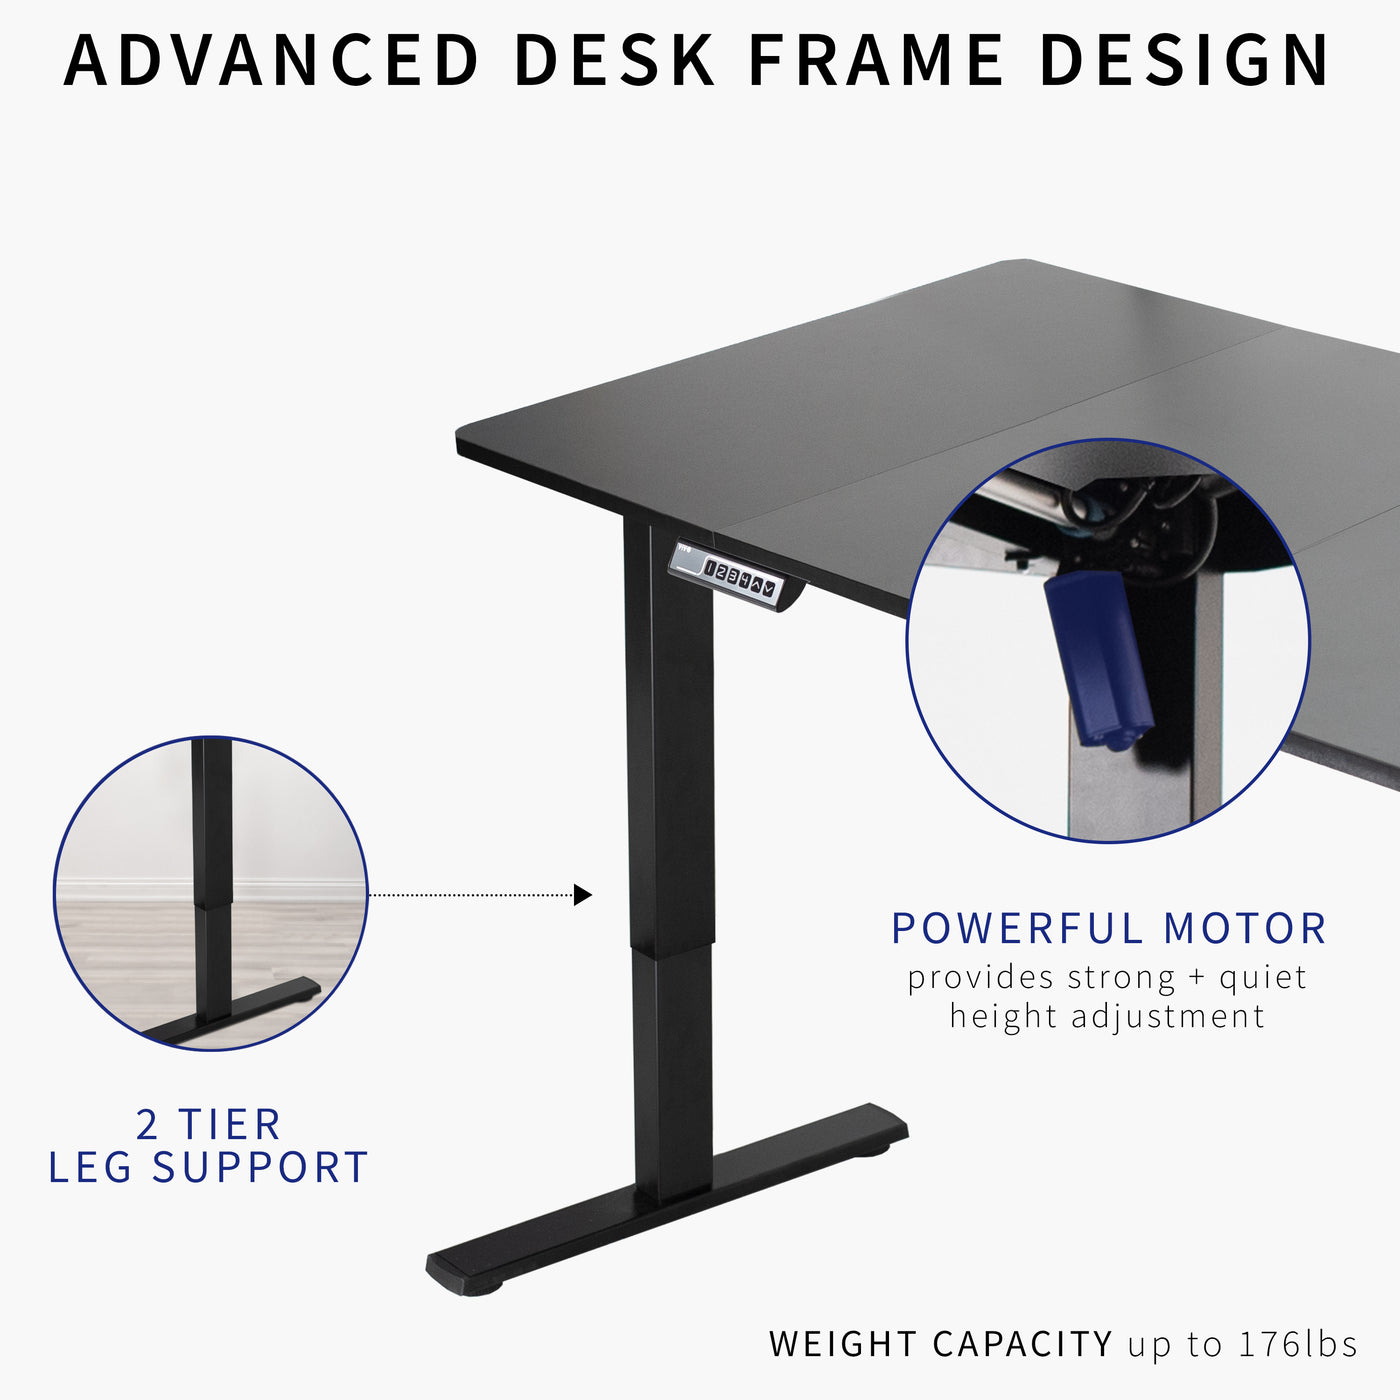 Ultra modern desk frame design with a powerful motor and sturdy leg support.